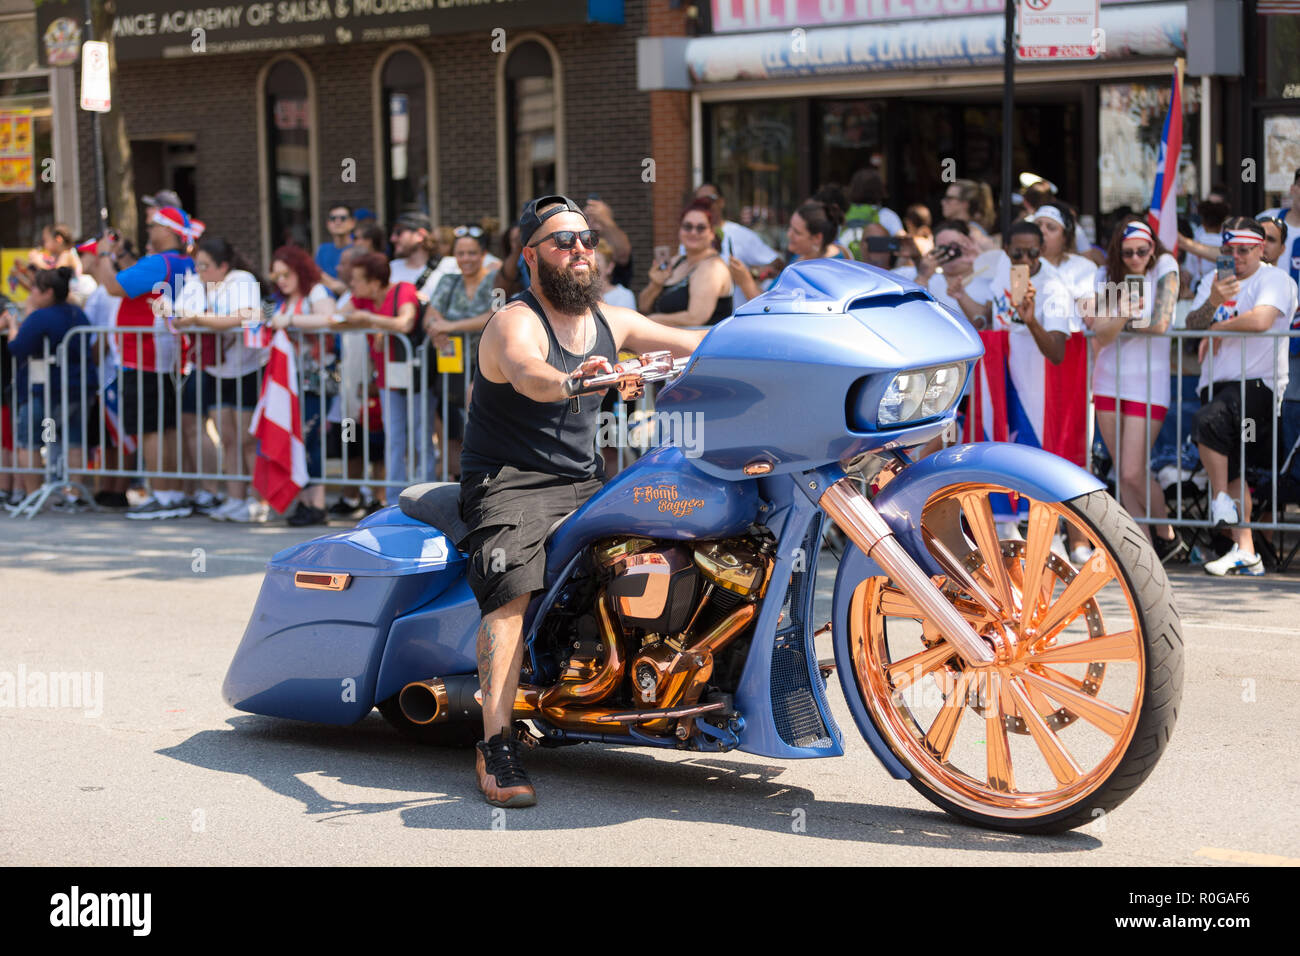 Chicago, Illinois, USA - June 16, 2018: The Puerto Rican People's Parade, Man riding a custom build motorcycle with large wheels and a sticker that sa Stock Photo